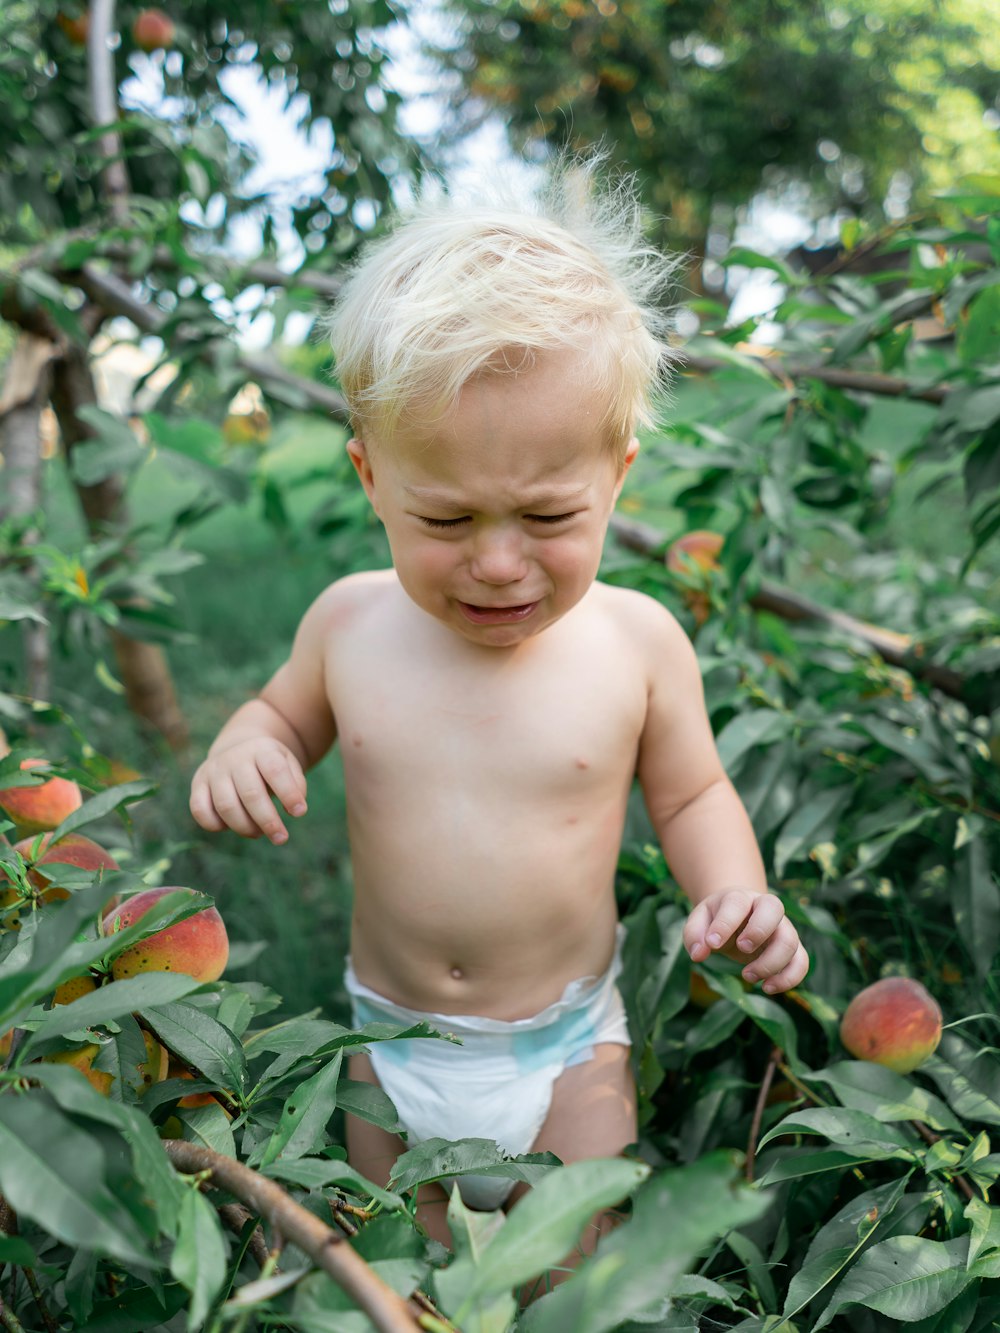 topless child in white and blue shorts standing on red flower field during daytime